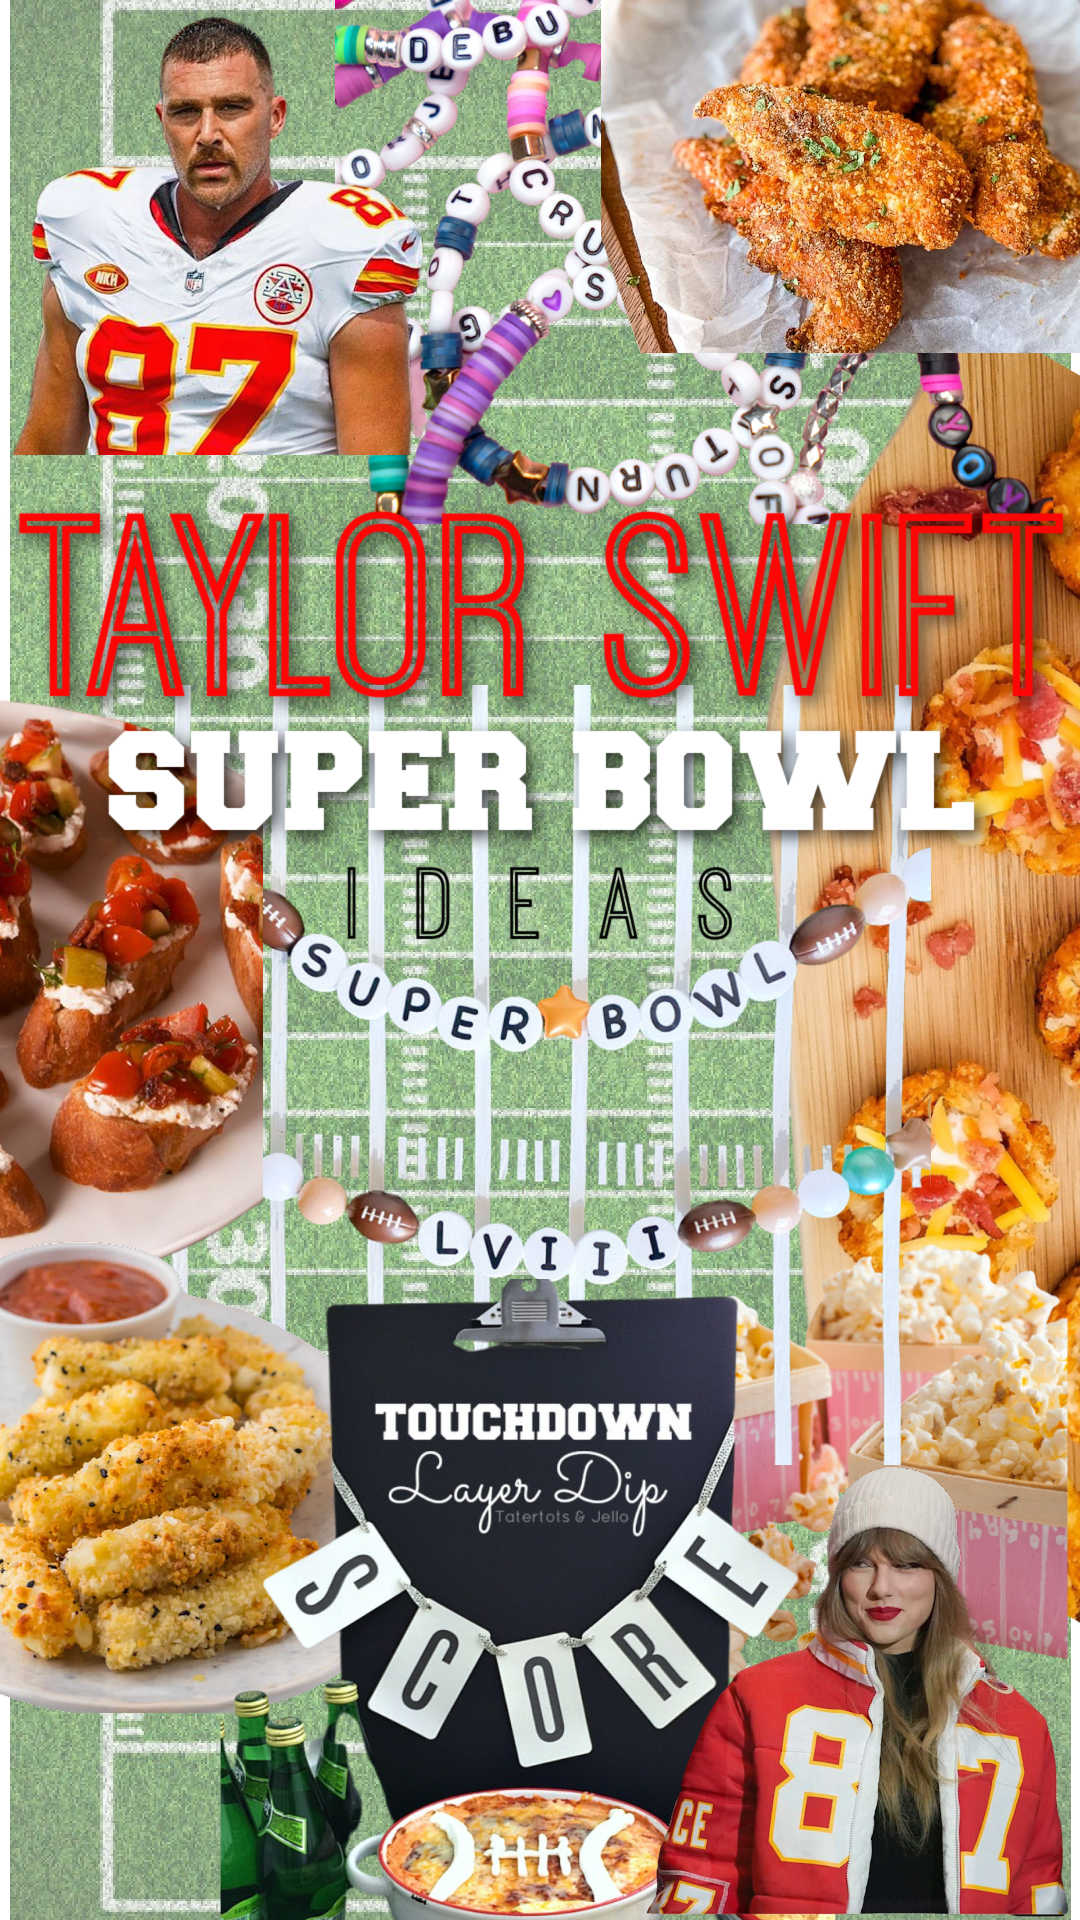 Taylor Swift Super Bowl Party Ideas. Elevate your Super Bowl party with Taylor Swift-themed recipes and decor, from savory bites like 'You Belong with Meats Charcuterie Board' to crafty 'DIY Friendship Bracelet Garlands.